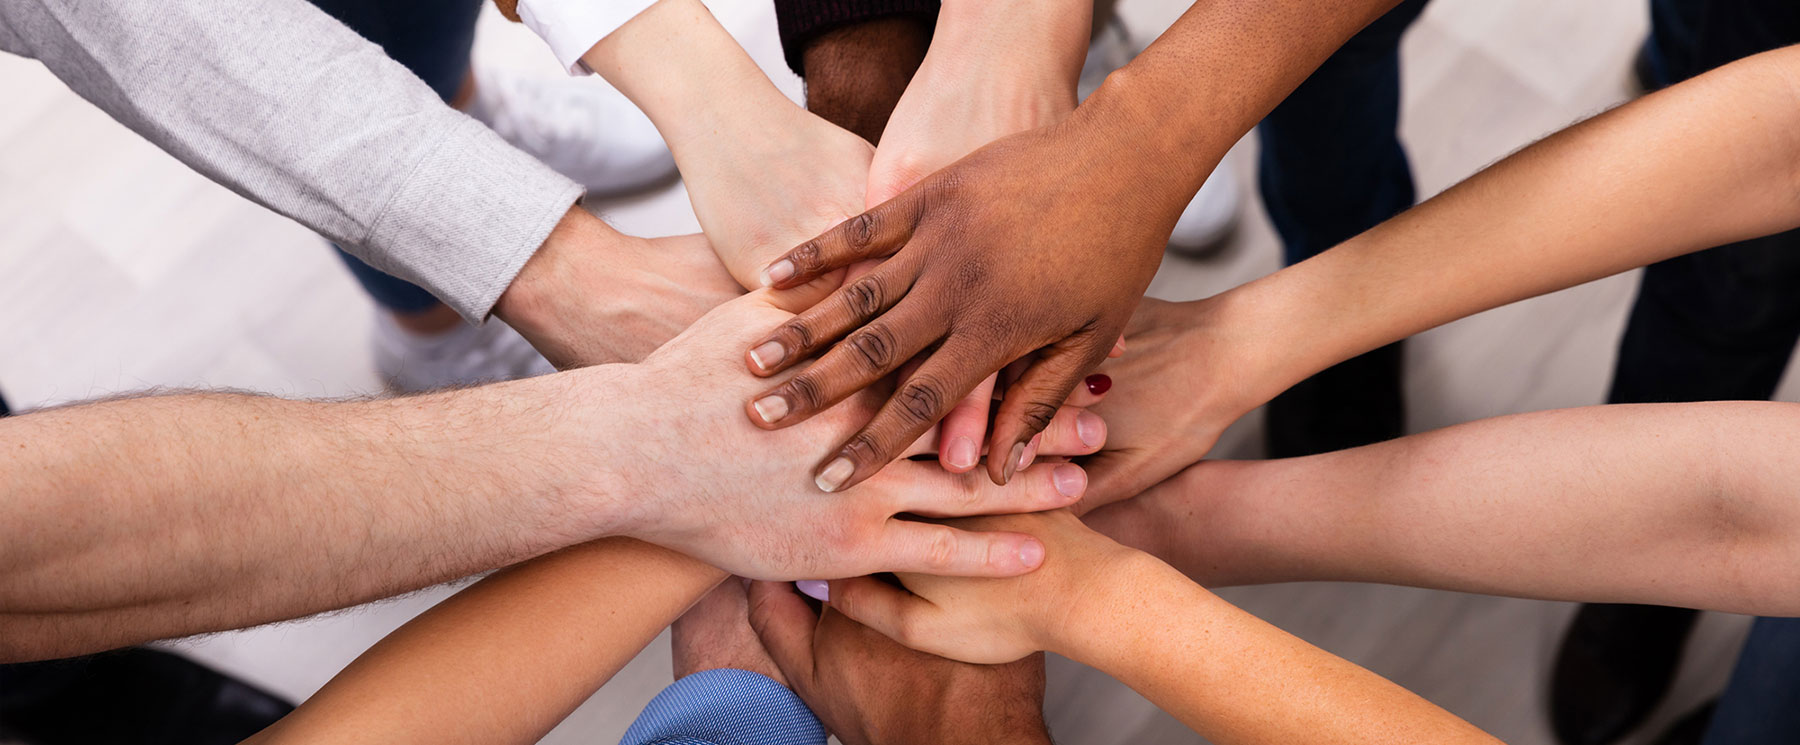 A team of professionals participate in a team building exercise with their hands in the center of the group.